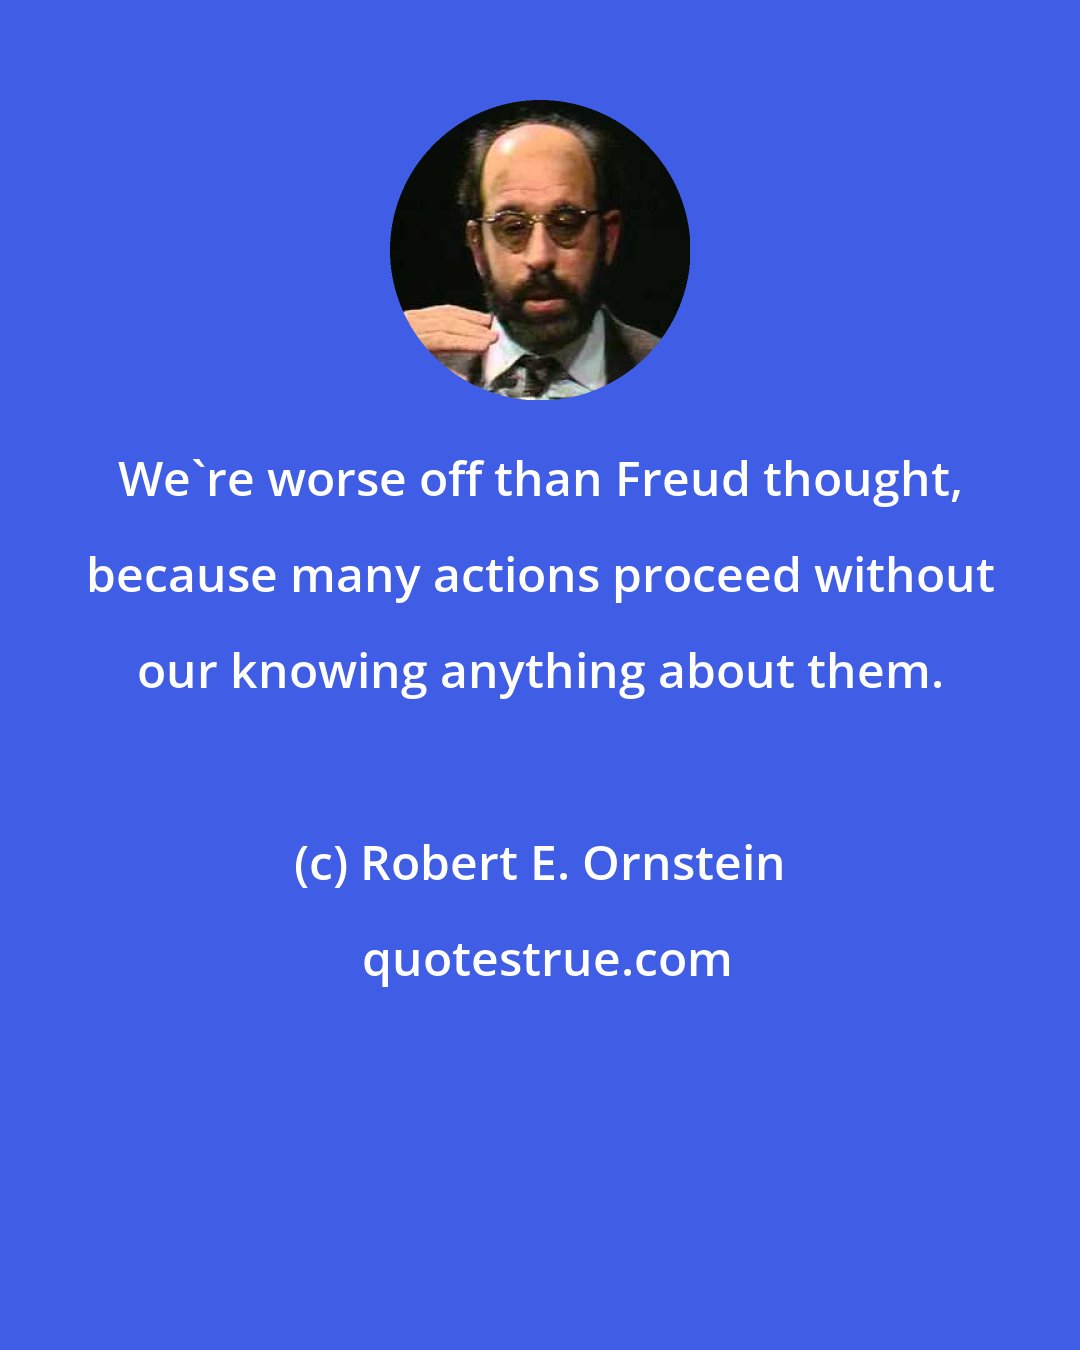 Robert E. Ornstein: We're worse off than Freud thought, because many actions proceed without our knowing anything about them.